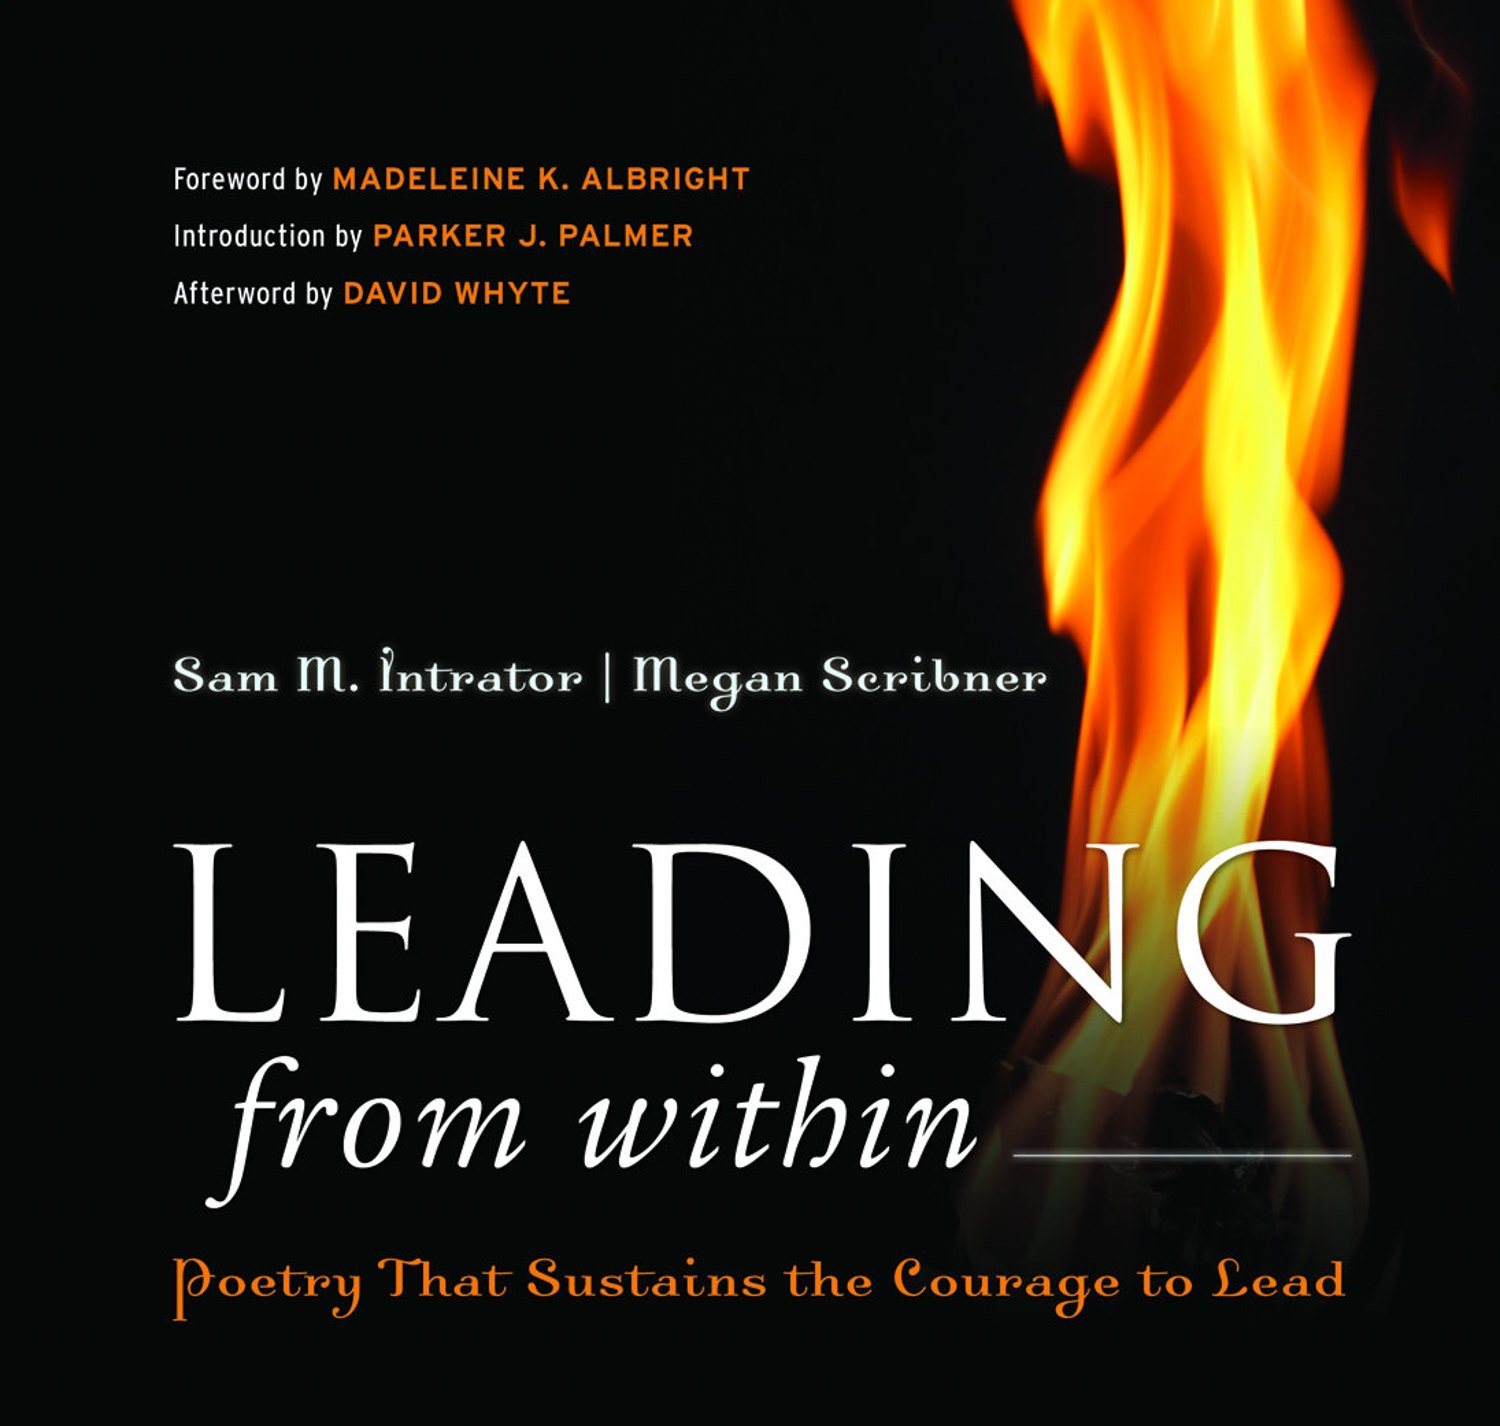 The cover for "Leading from Within."